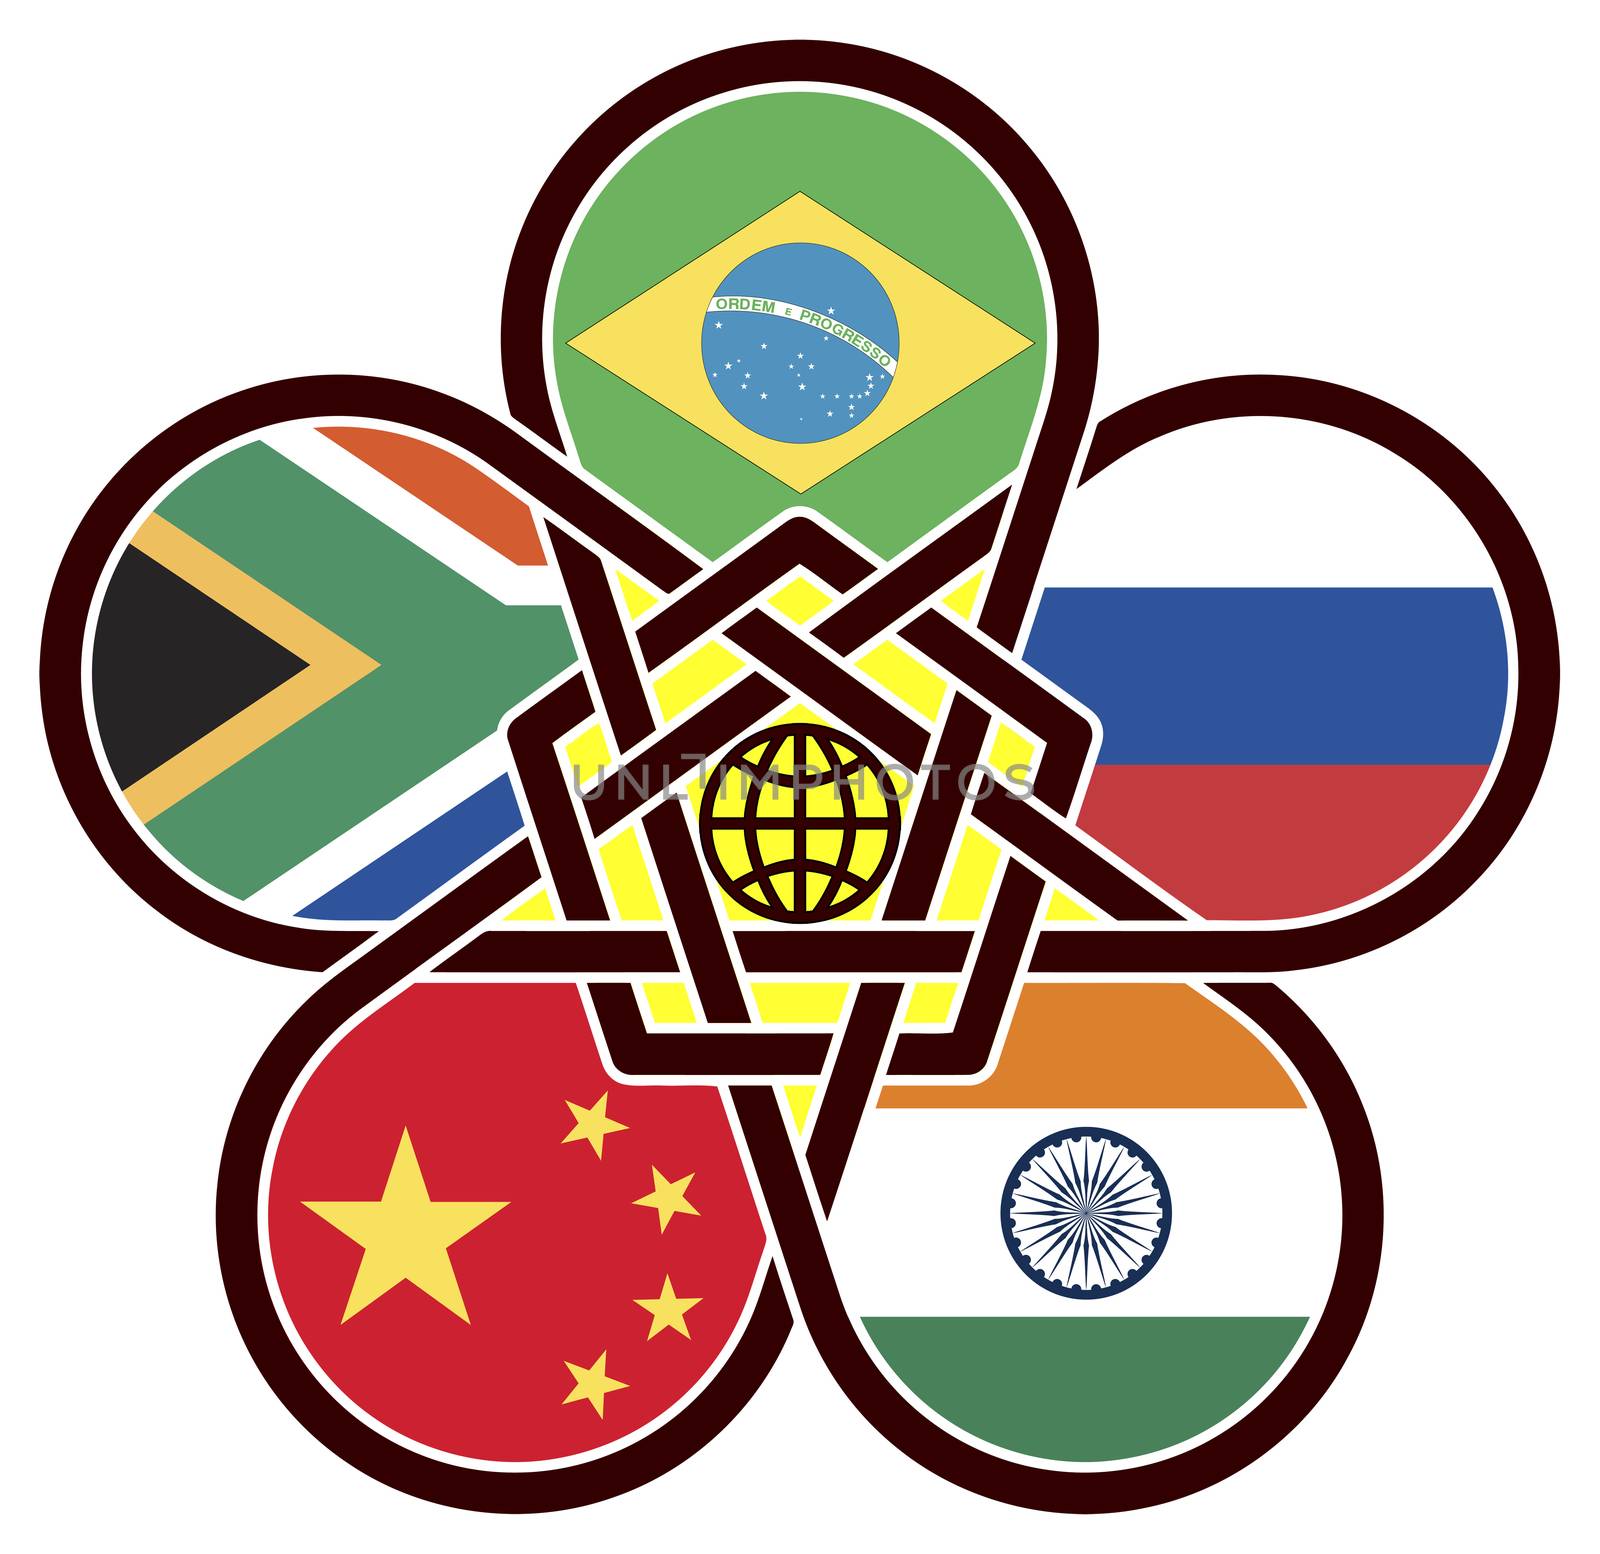 BRICS: Symbol of the association of emerging national economies, Brazil, Russia, India, China, South Africa